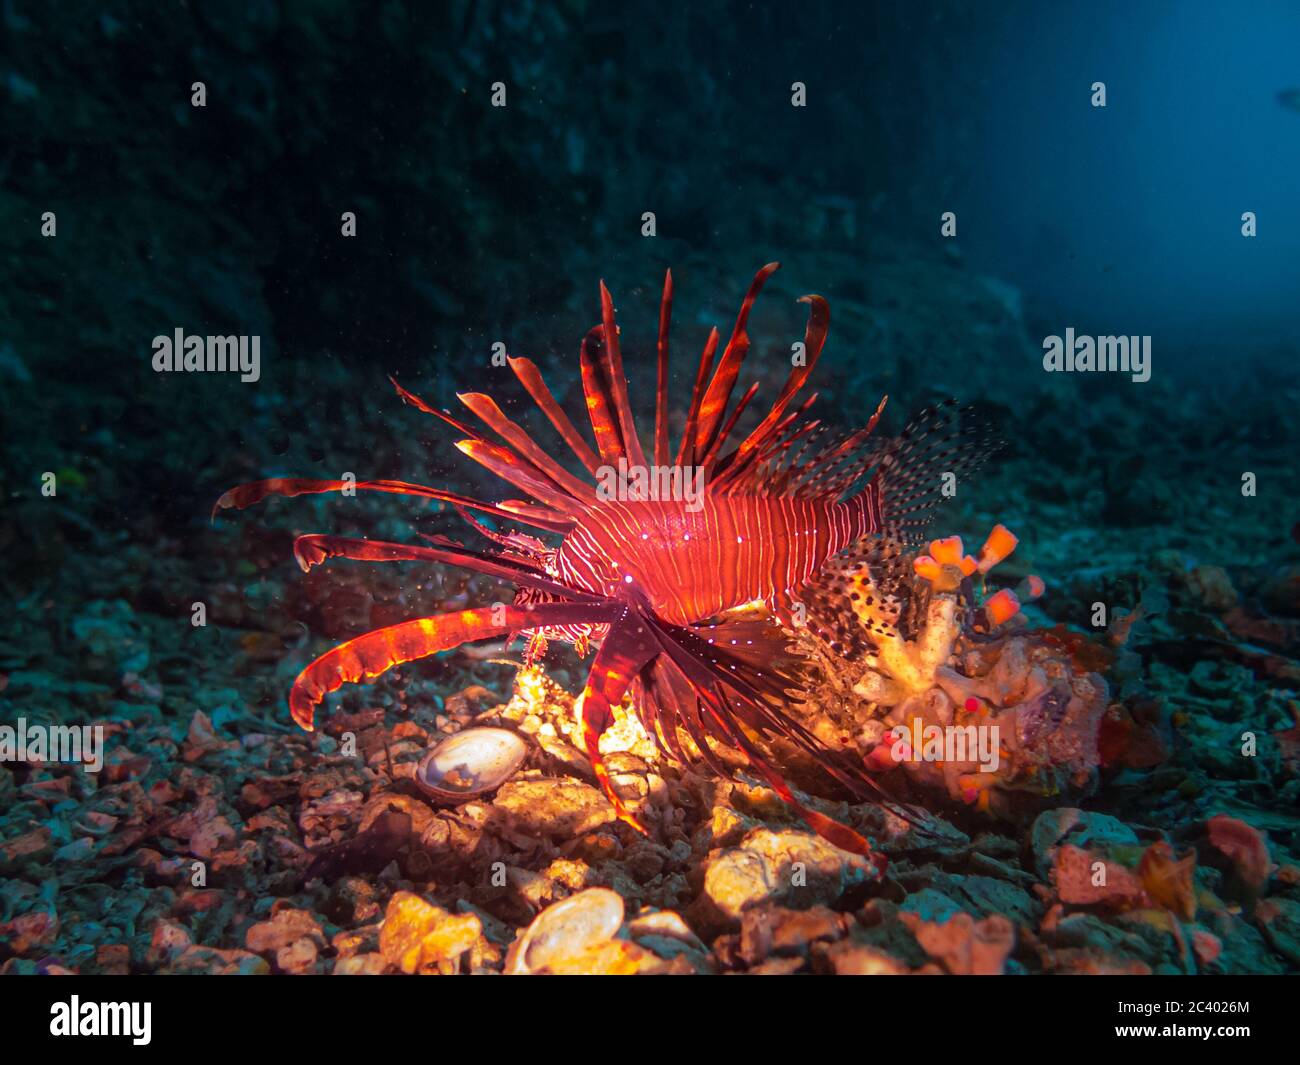 A Lionfish lit up with a torch near the entrance of a cave at Gato Island, Malapascua, Philippines Stock Photo